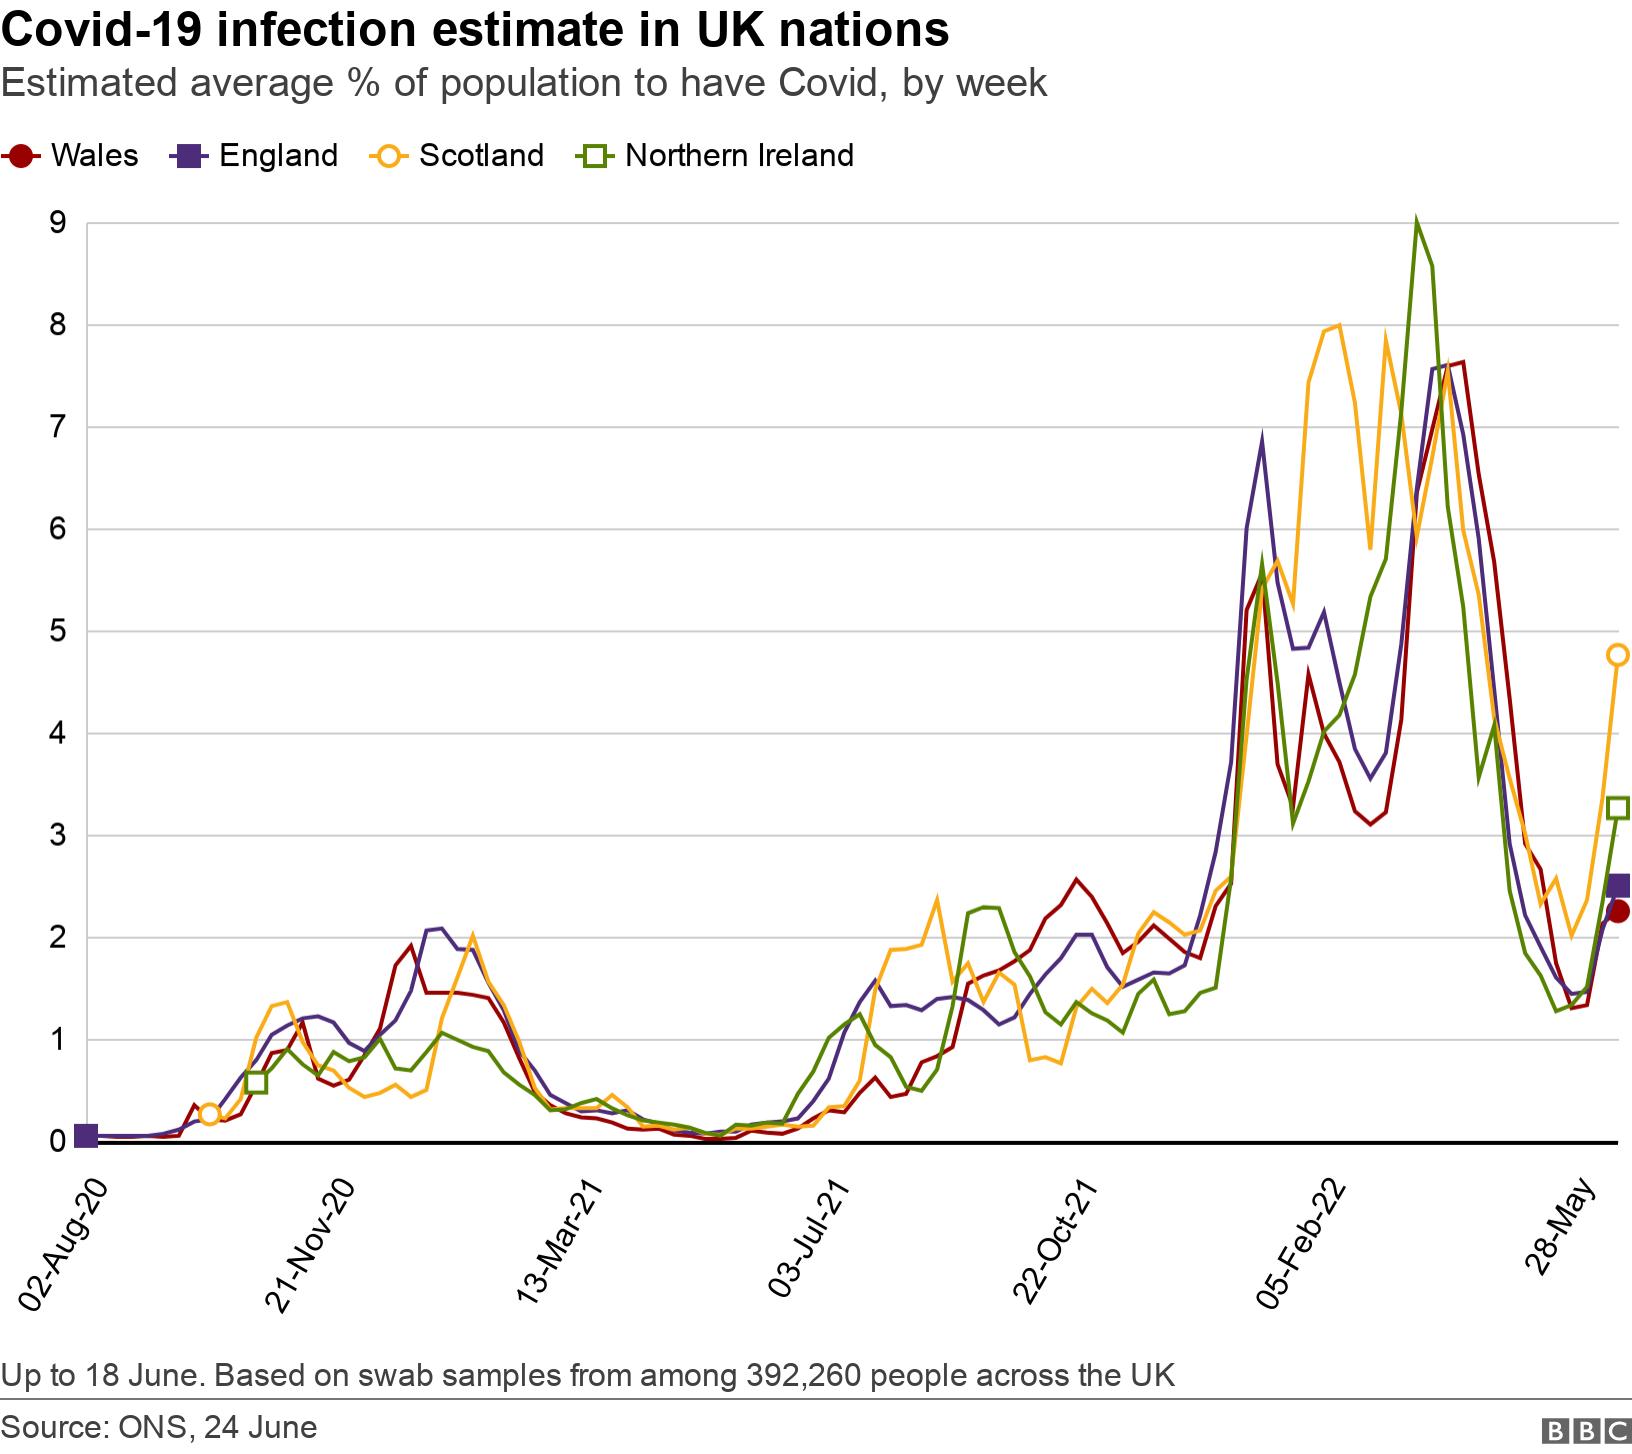 Covid-19 infection estimate in UK nations. Estimated average % of population to have Covid, by week.  Up to 18 June. Based on swab samples from among 392,260 people across the UK.